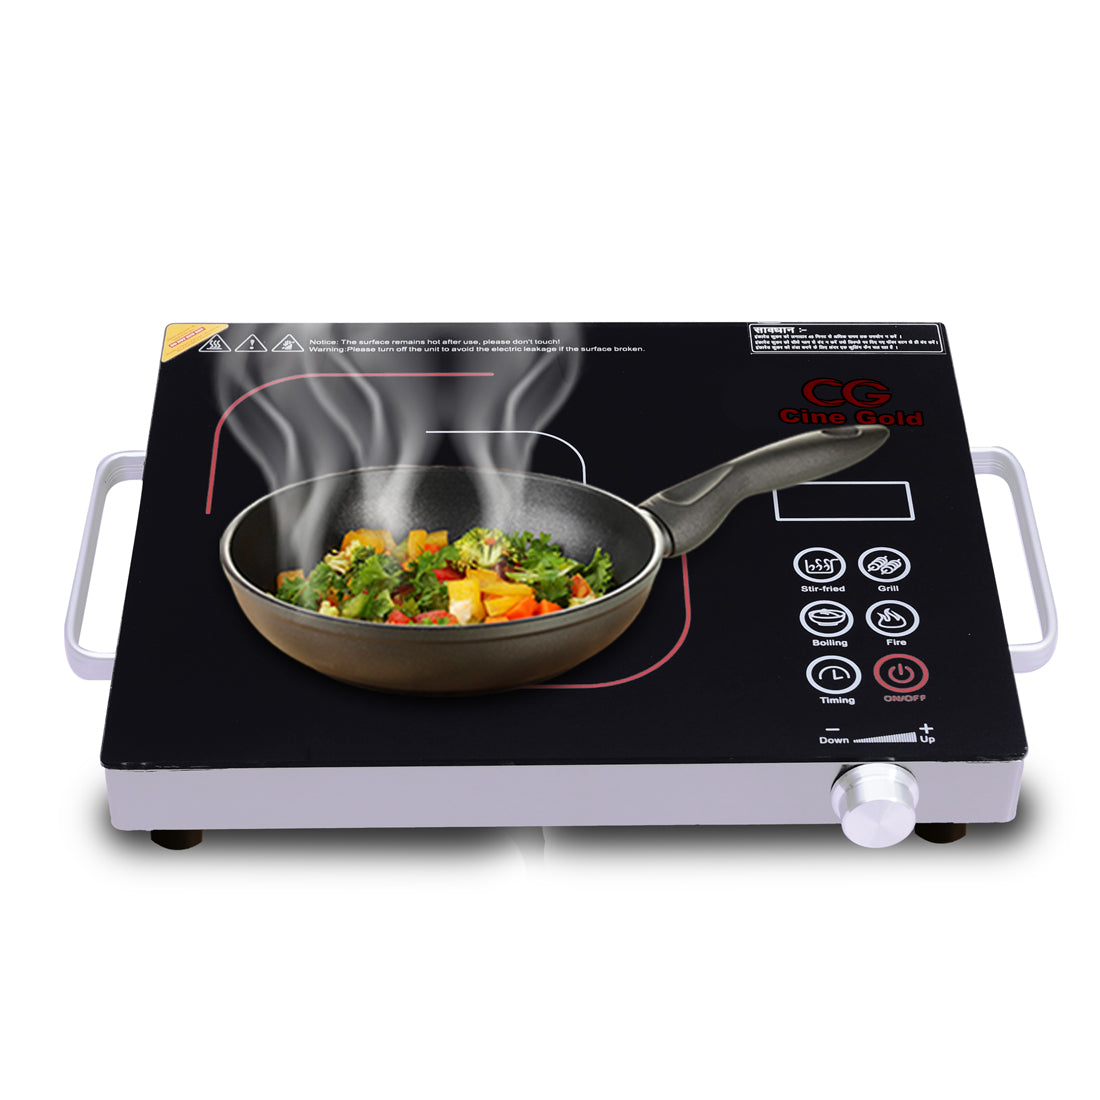 Cine Gold 2200W Multifunction Infra Cooktop: Modern Cooking Convenience with Toughened Glass Touch Panel Display - Compatible with All Utensils, 1-Year Warranty Included (Silver)